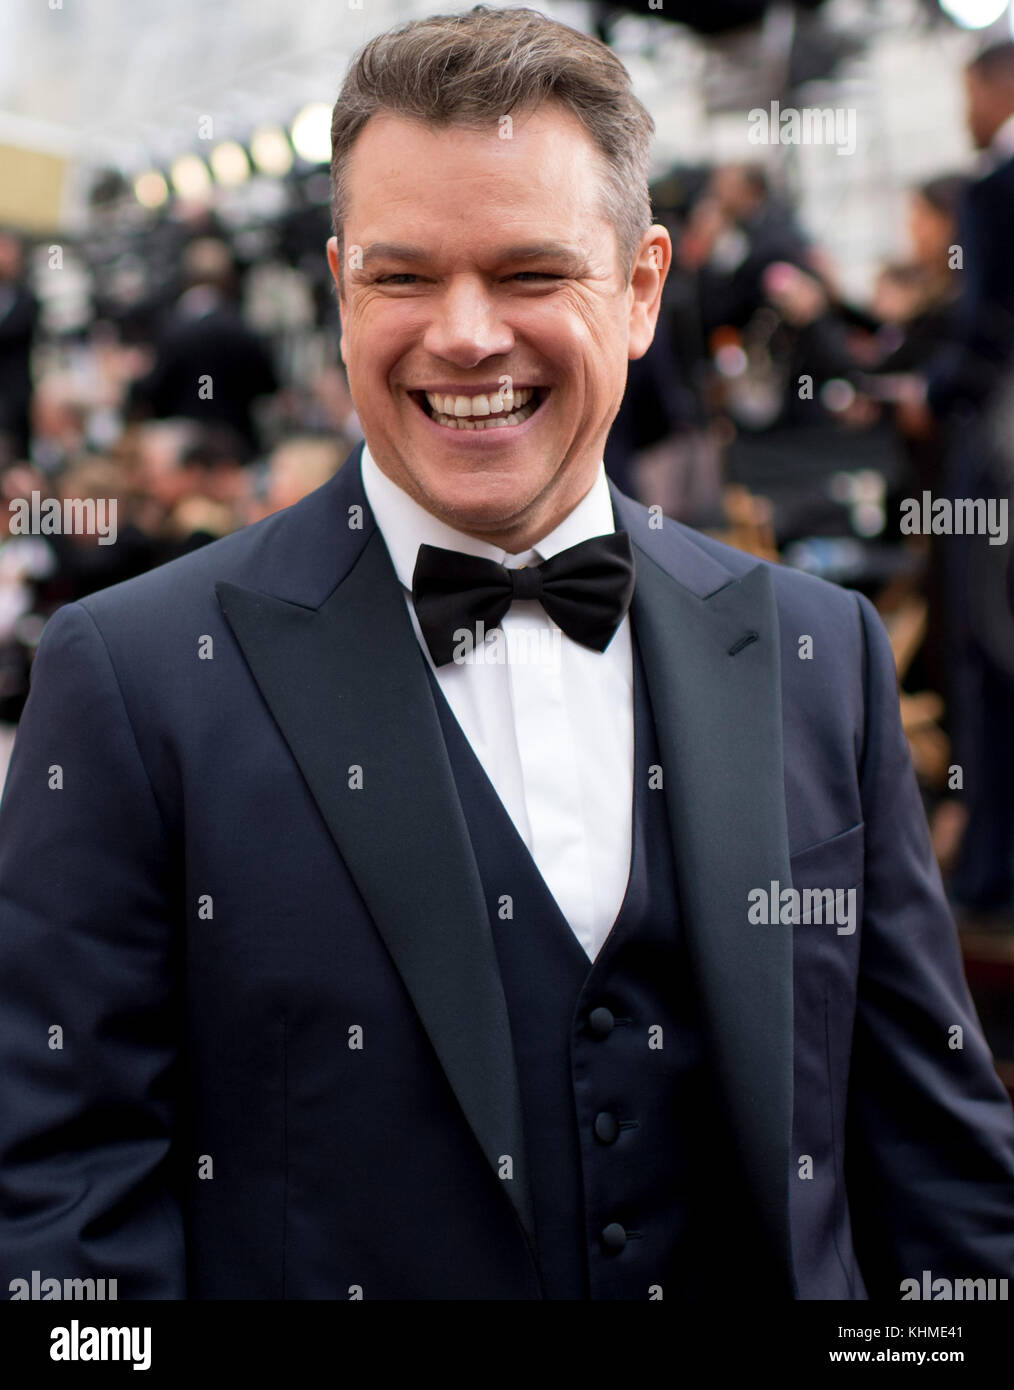 HOLLYWOOD, CA - FEBRUARY 26: Matt Damon attends the 89th Annual Academy Awards at Hollywood & Highland Center on February 26, 2017 in Hollywood, California  People:  Matt Damon  Transmission Ref:  MNC Stock Photo